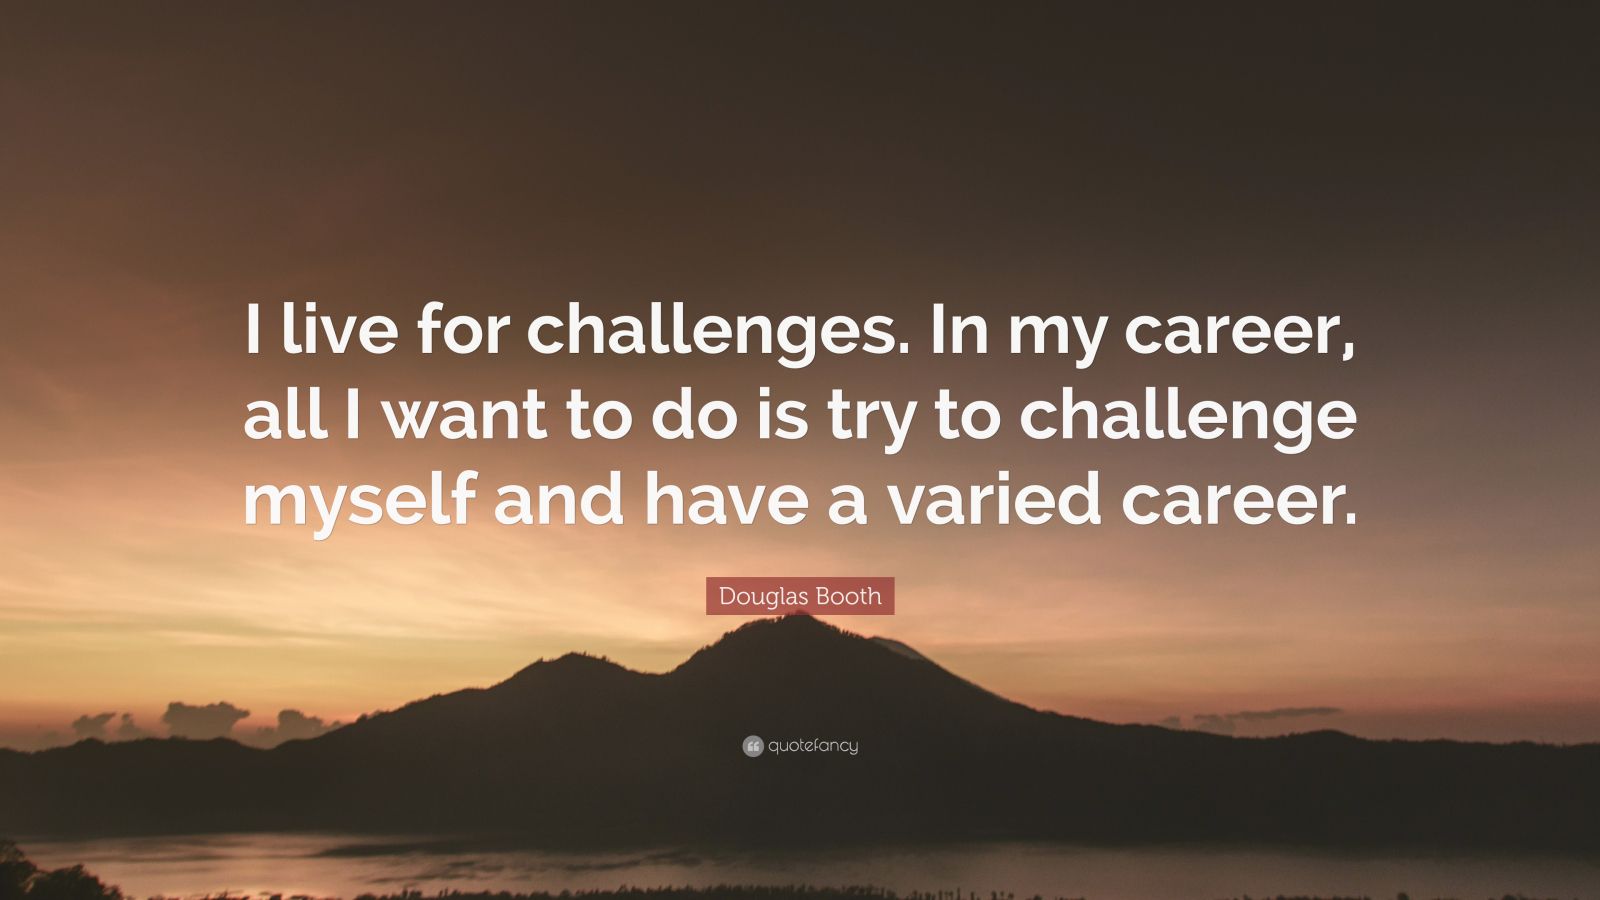 Douglas Booth Quote: “I live for challenges. In my career, all I want ...